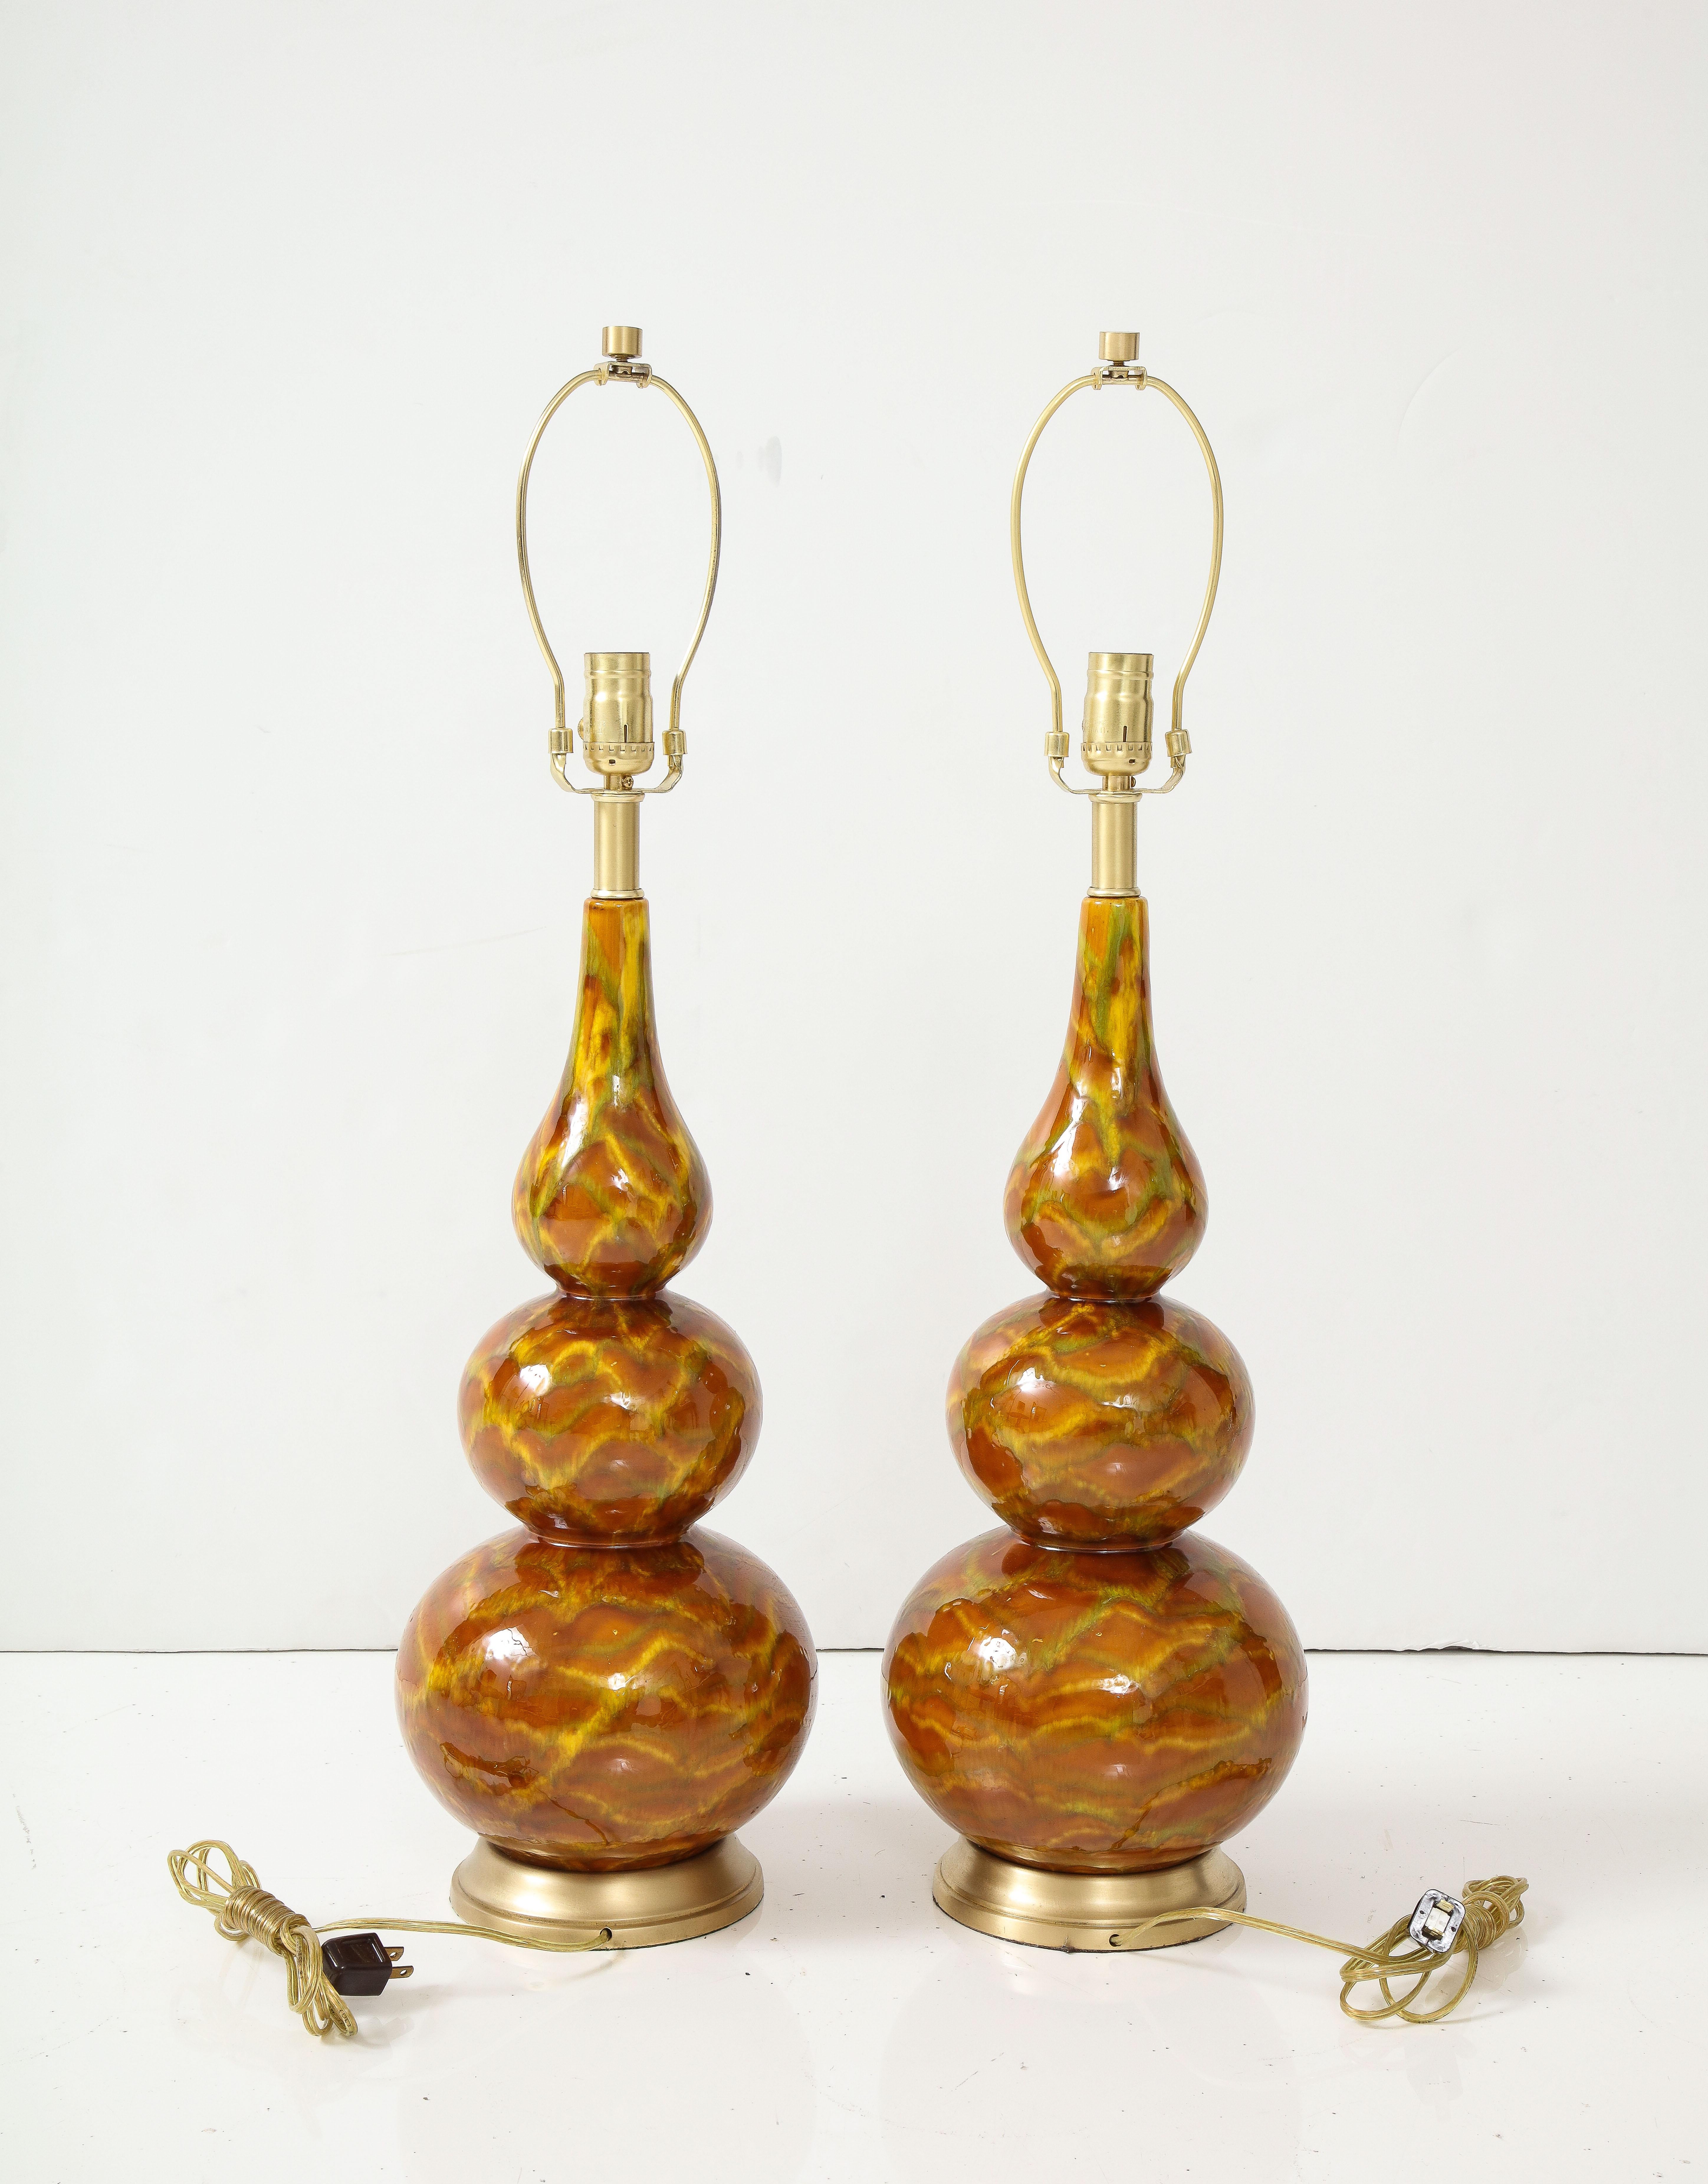 Pair of mottled earth tone glazed ceramic lamps having a sinuous triple gourd shape, sitting on brass bases. Rewired for use in the USA, 100W bulb max.